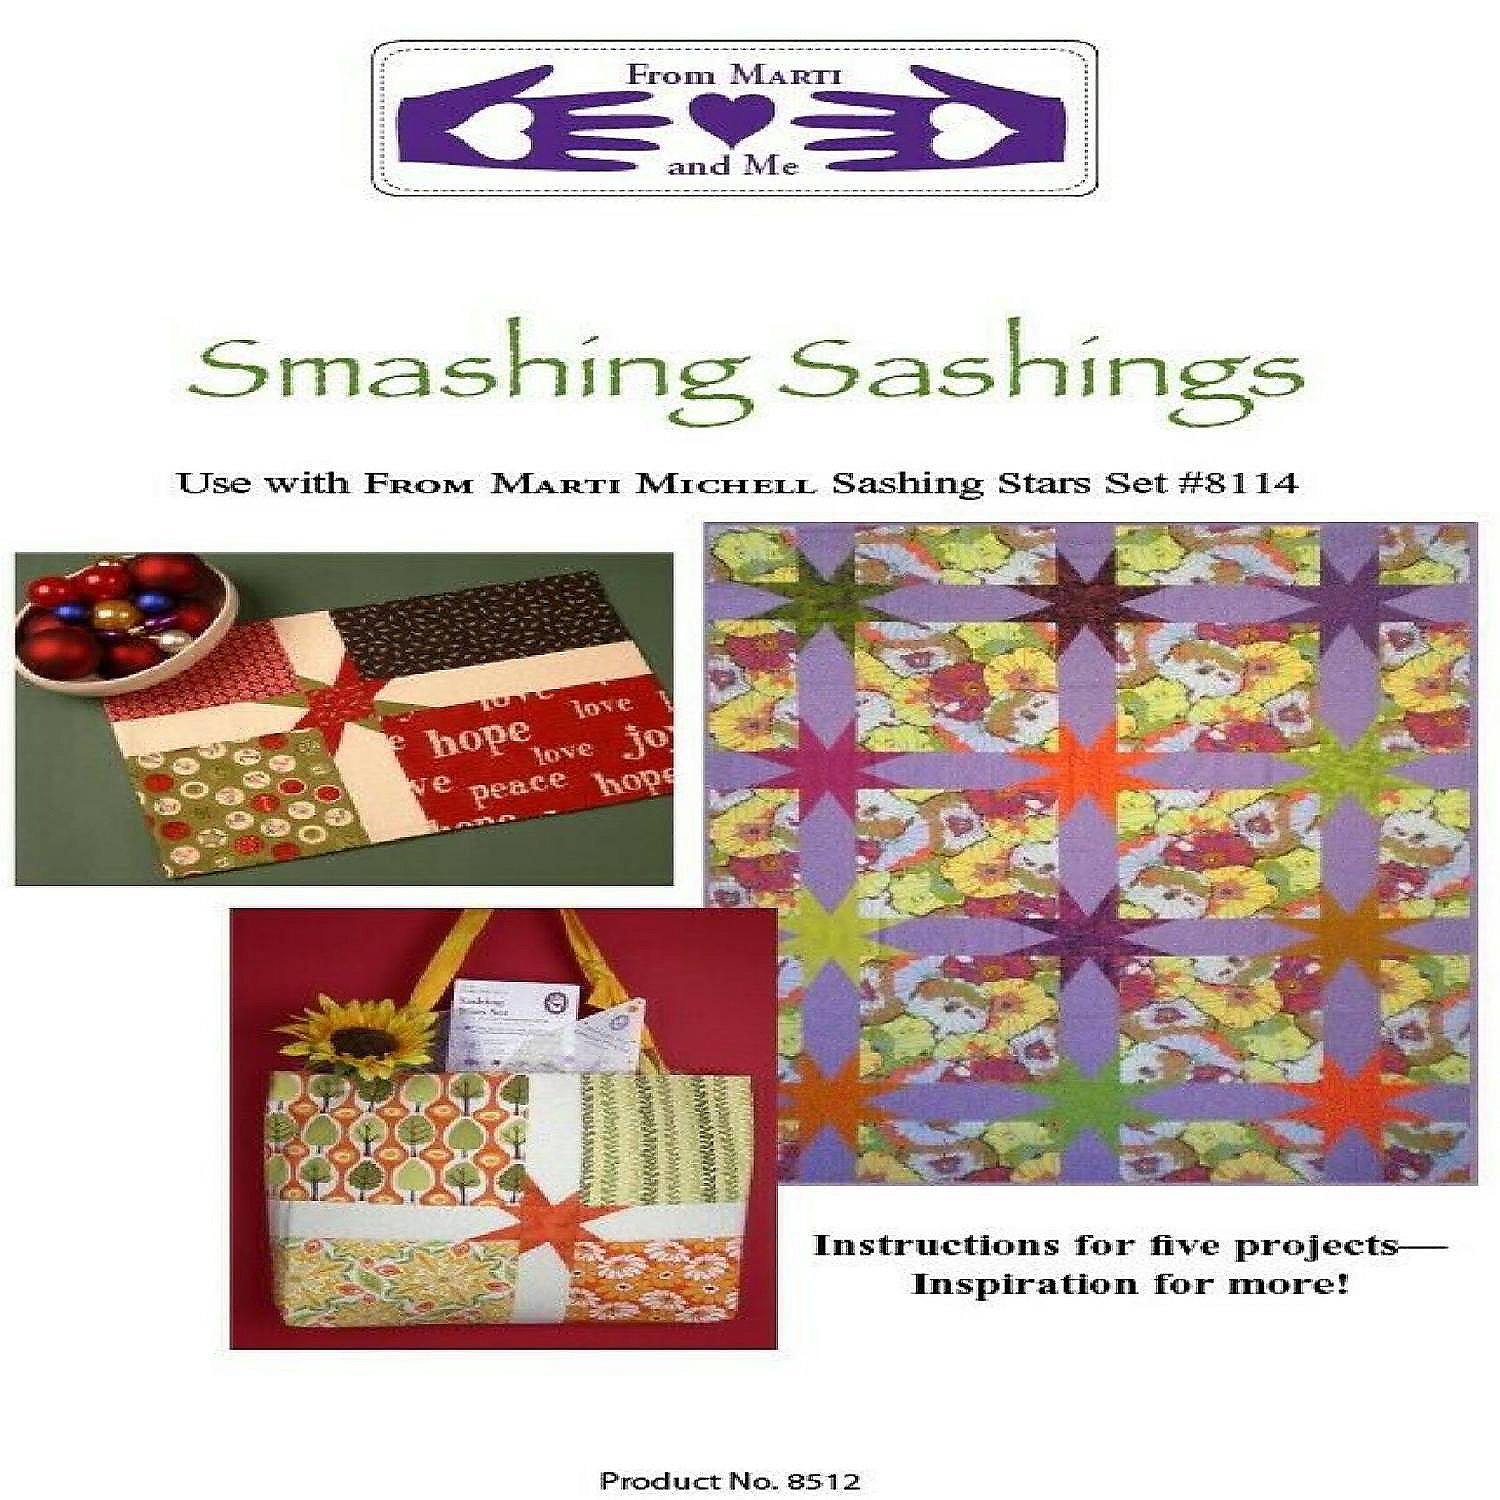 From Marti and Me Club Pattern #12: Smashing Sashings by Michell Marketing  | Oriental Trading